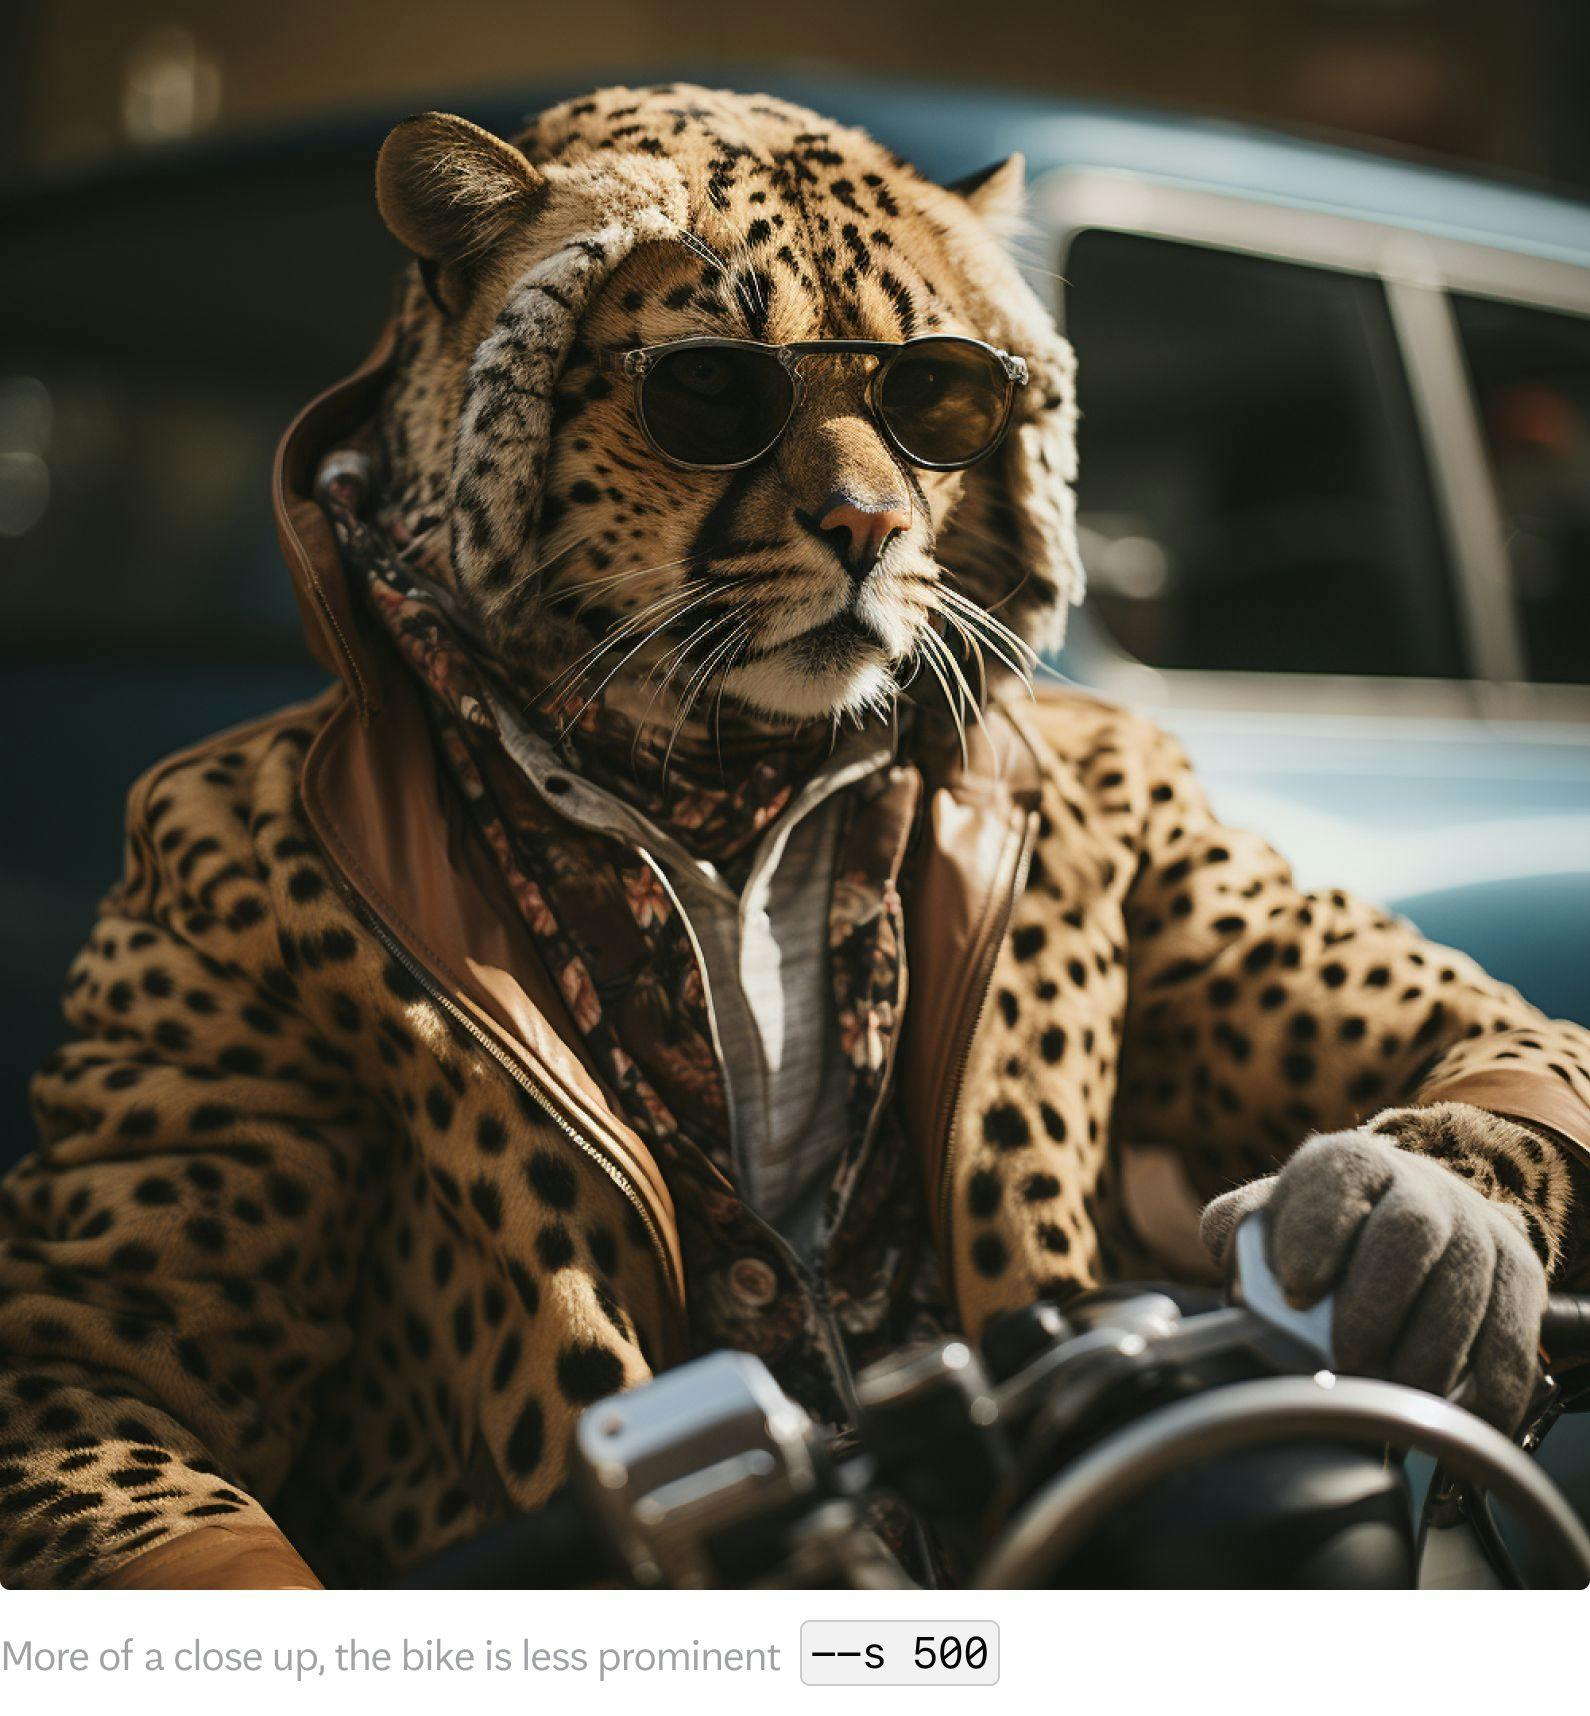 A cheetah in fashionable clothes riding a racing bike, wearing sunglasses